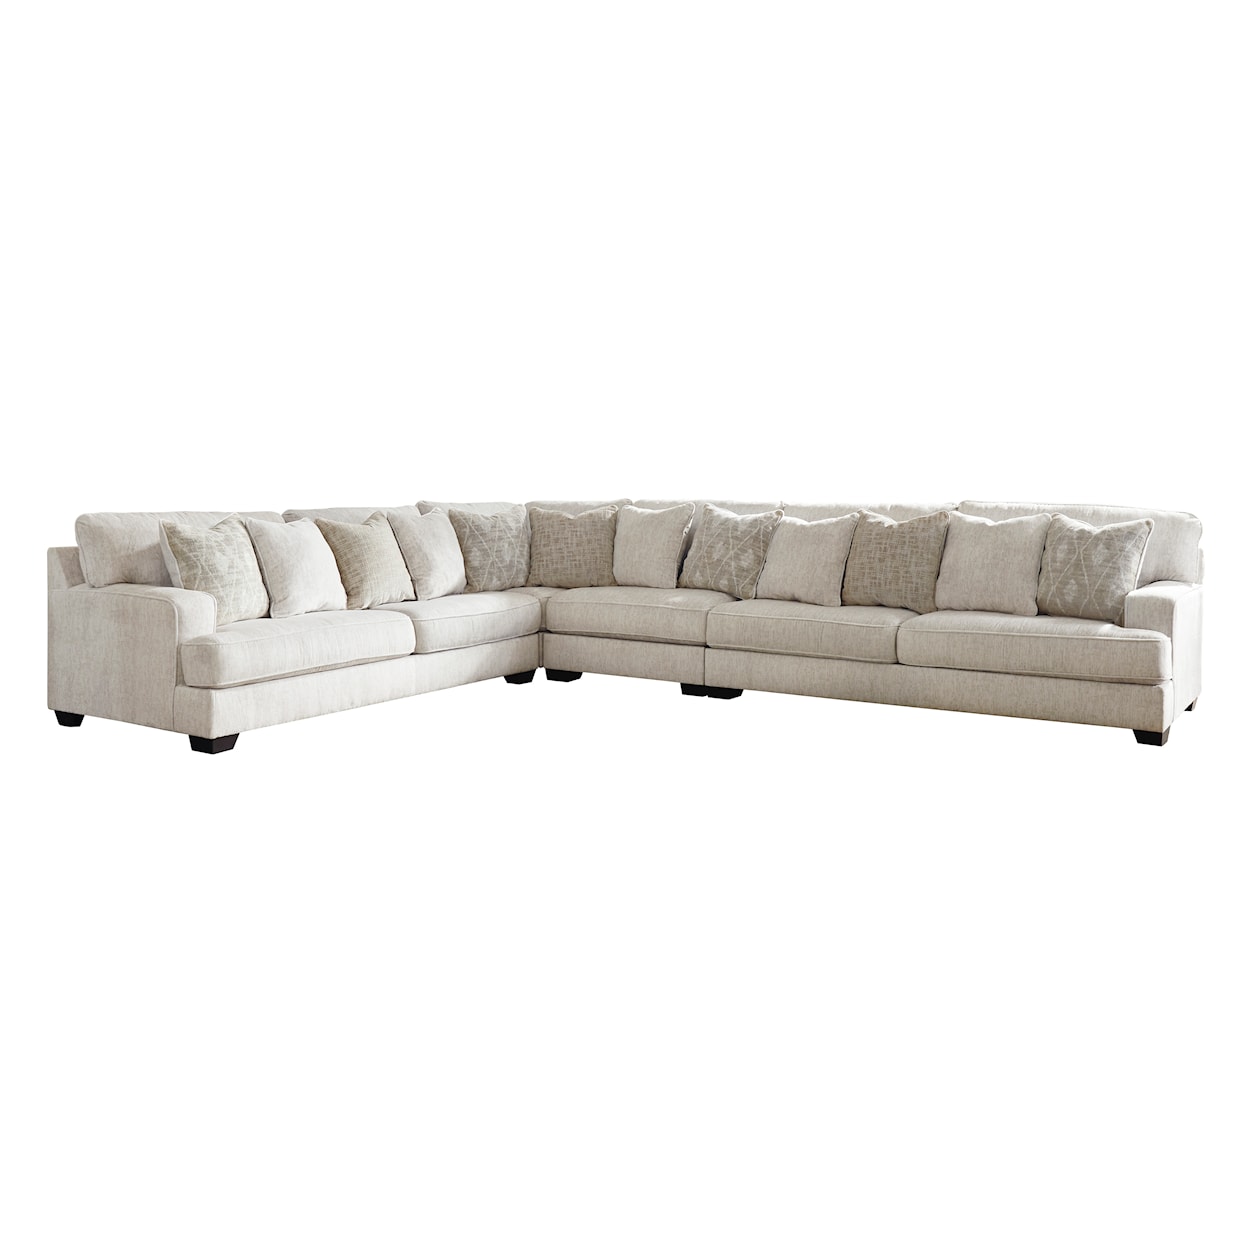 Signature Design by Ashley Rawcliffe 4-Piece Sectional